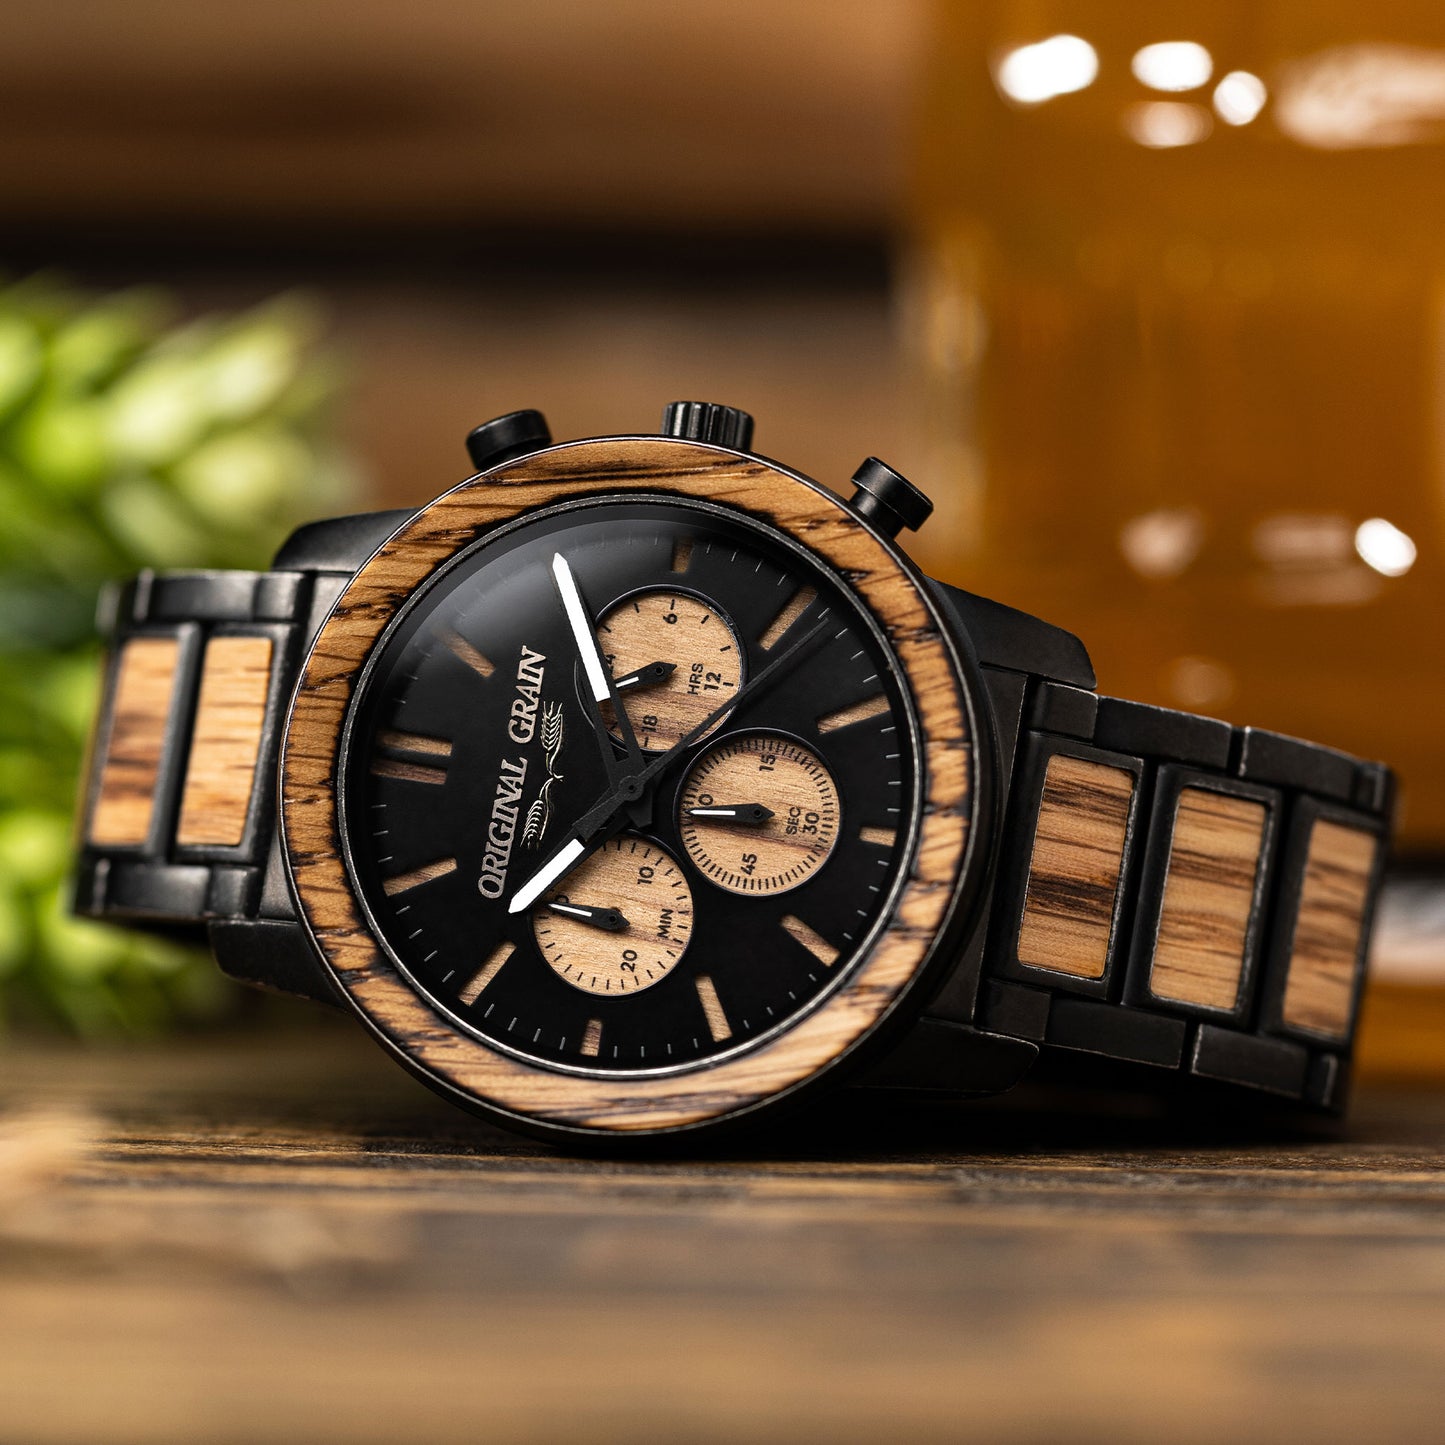 Brewmaster Laufchrono 42 mm